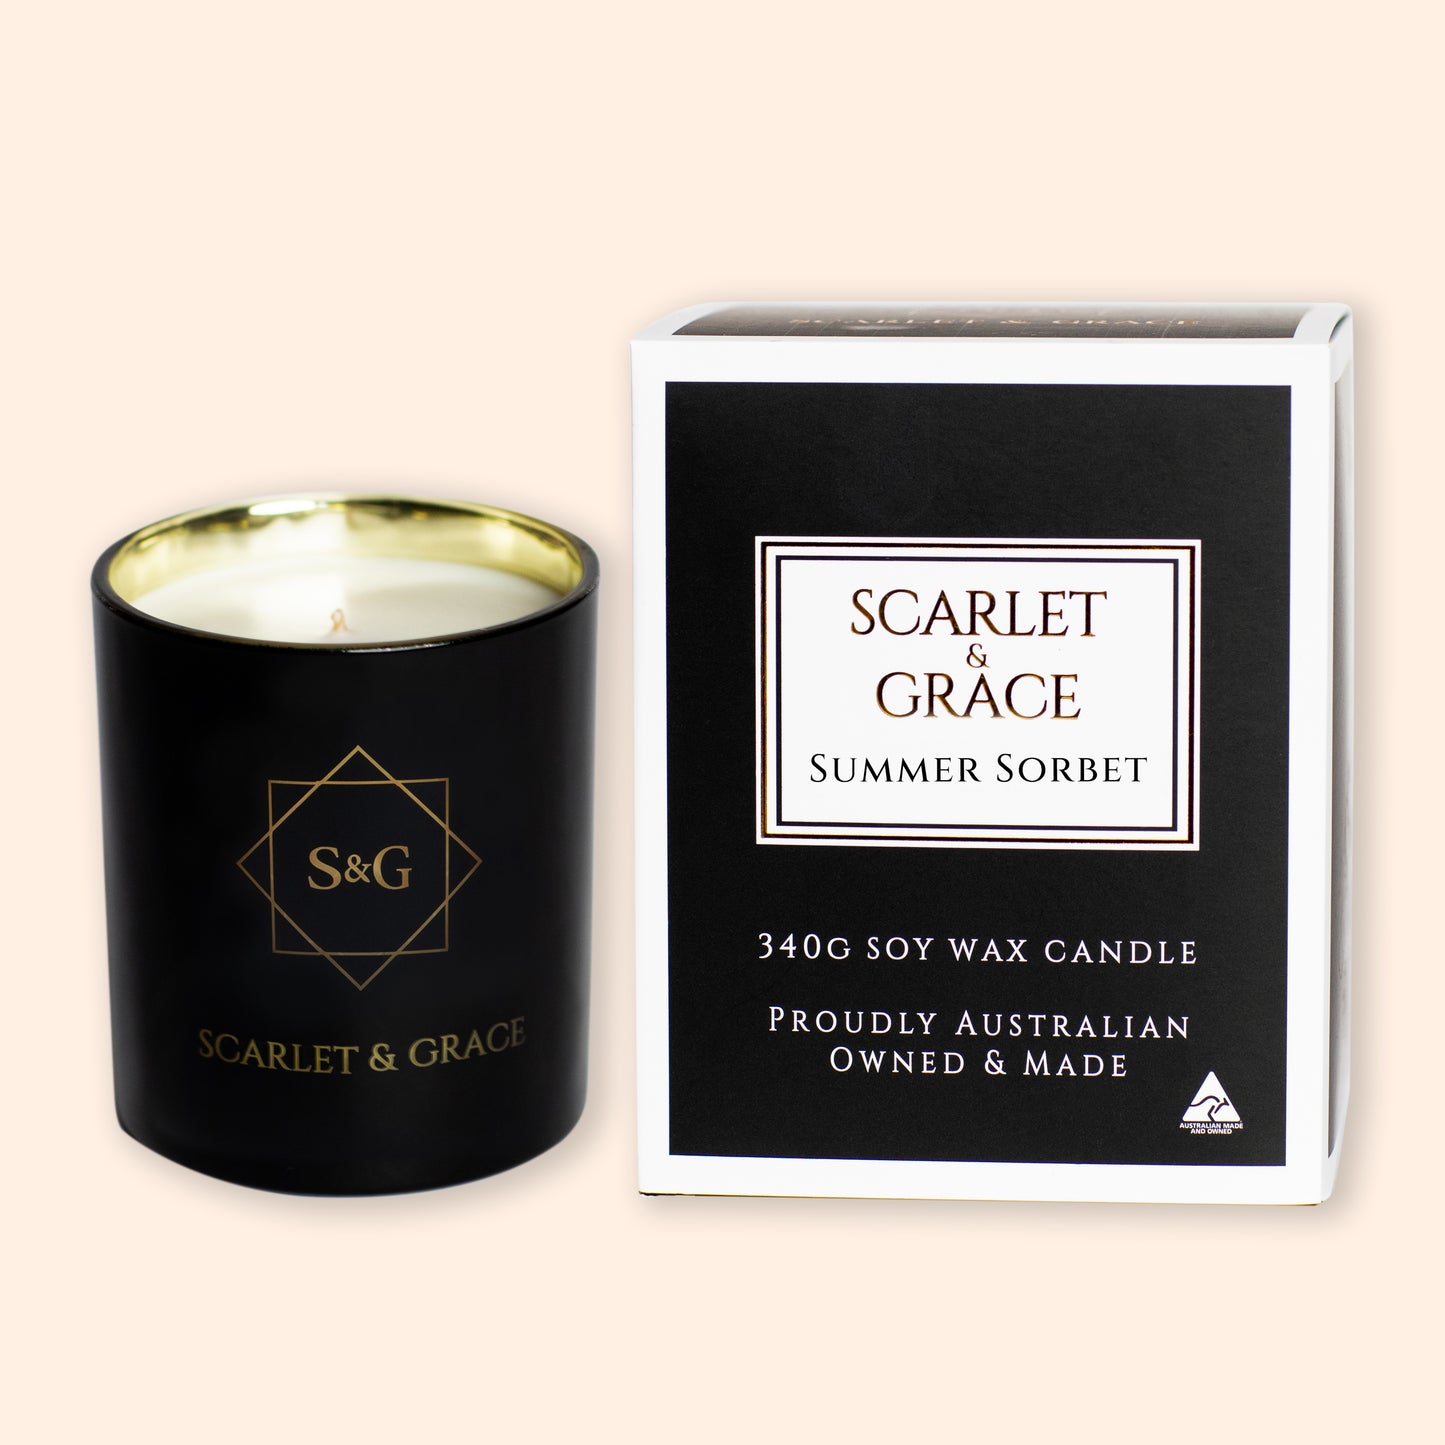 Summer Sorbet - 340gm Soy Wax Candle - Scarlet & Grace